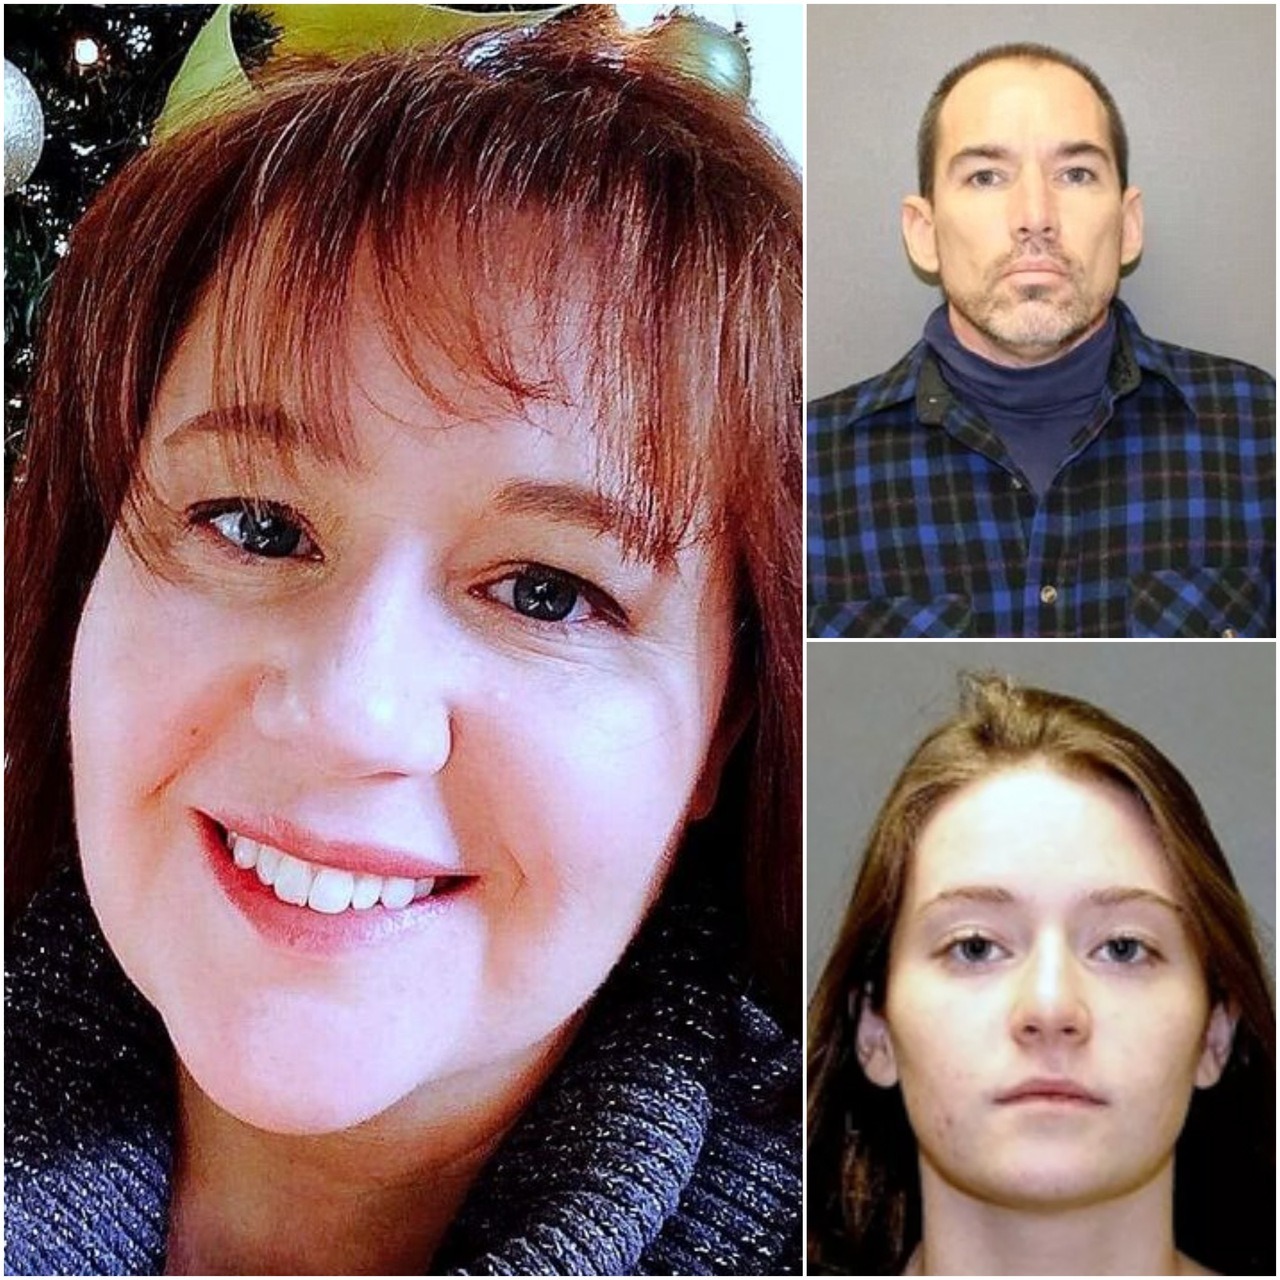 truecrimecrystals:
â€œ Michele Neurauter (pictured left) was brutally murdered by her ex-husband Lloyd Neurauter (pictured top right) in August 2017. Lloyd was assisted by their 19 year-old daughter Karrie Neurauter (pictured bottom right).
The...